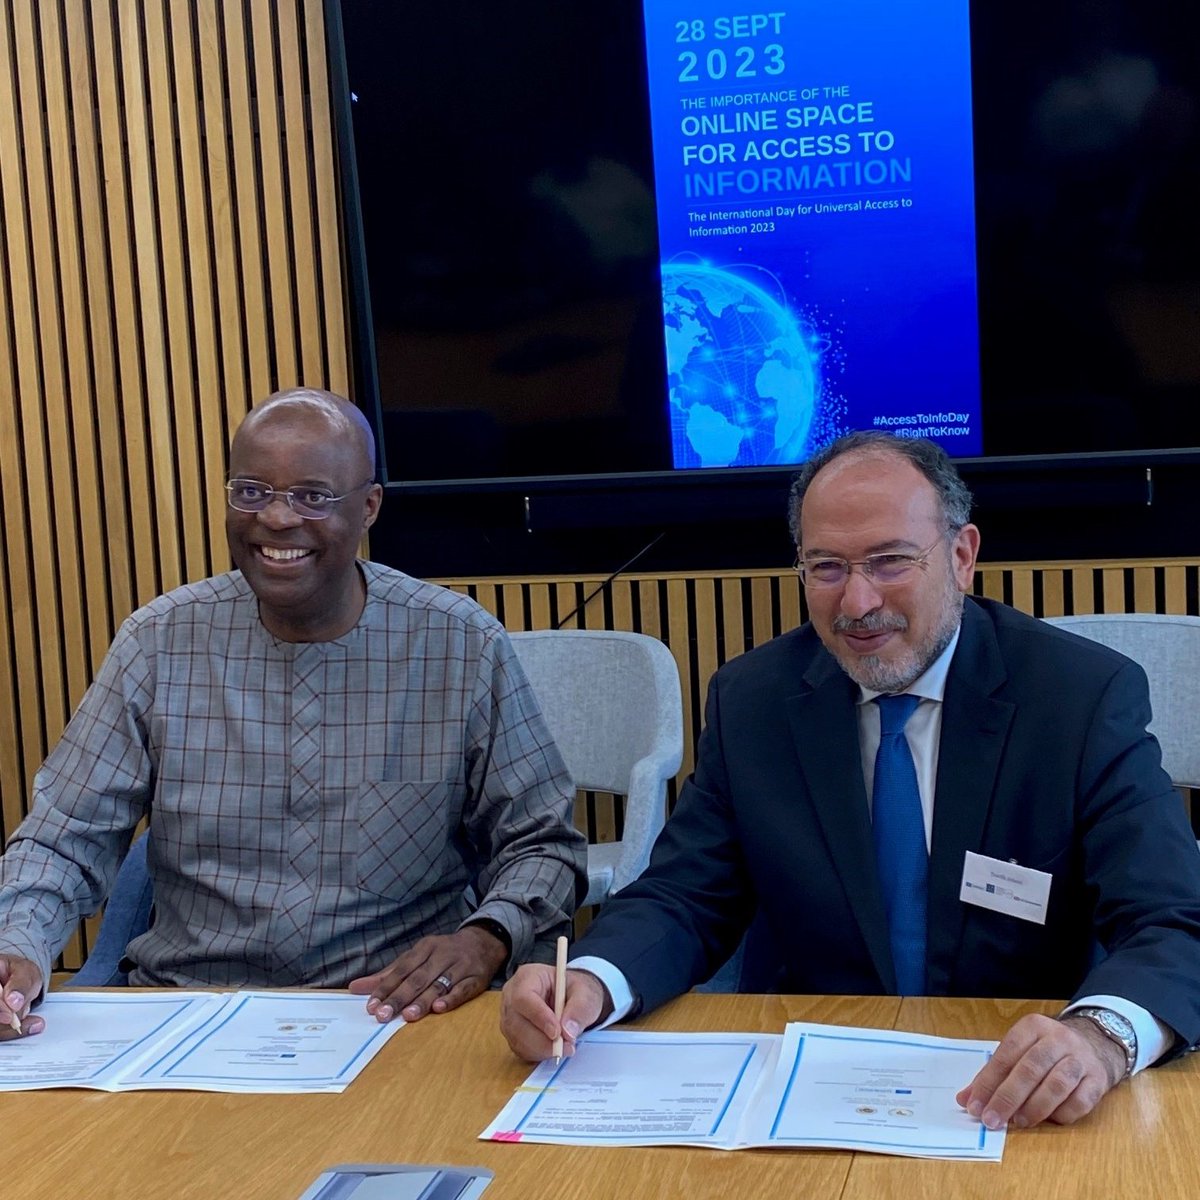 In the context of #IDUAI 2024 taking place in #Africa, UNESCO just signed a MoU with APRM (African Peer Review Mechanism) to reinforce the involvement of all key African stakeholders in #AccessToInfo.